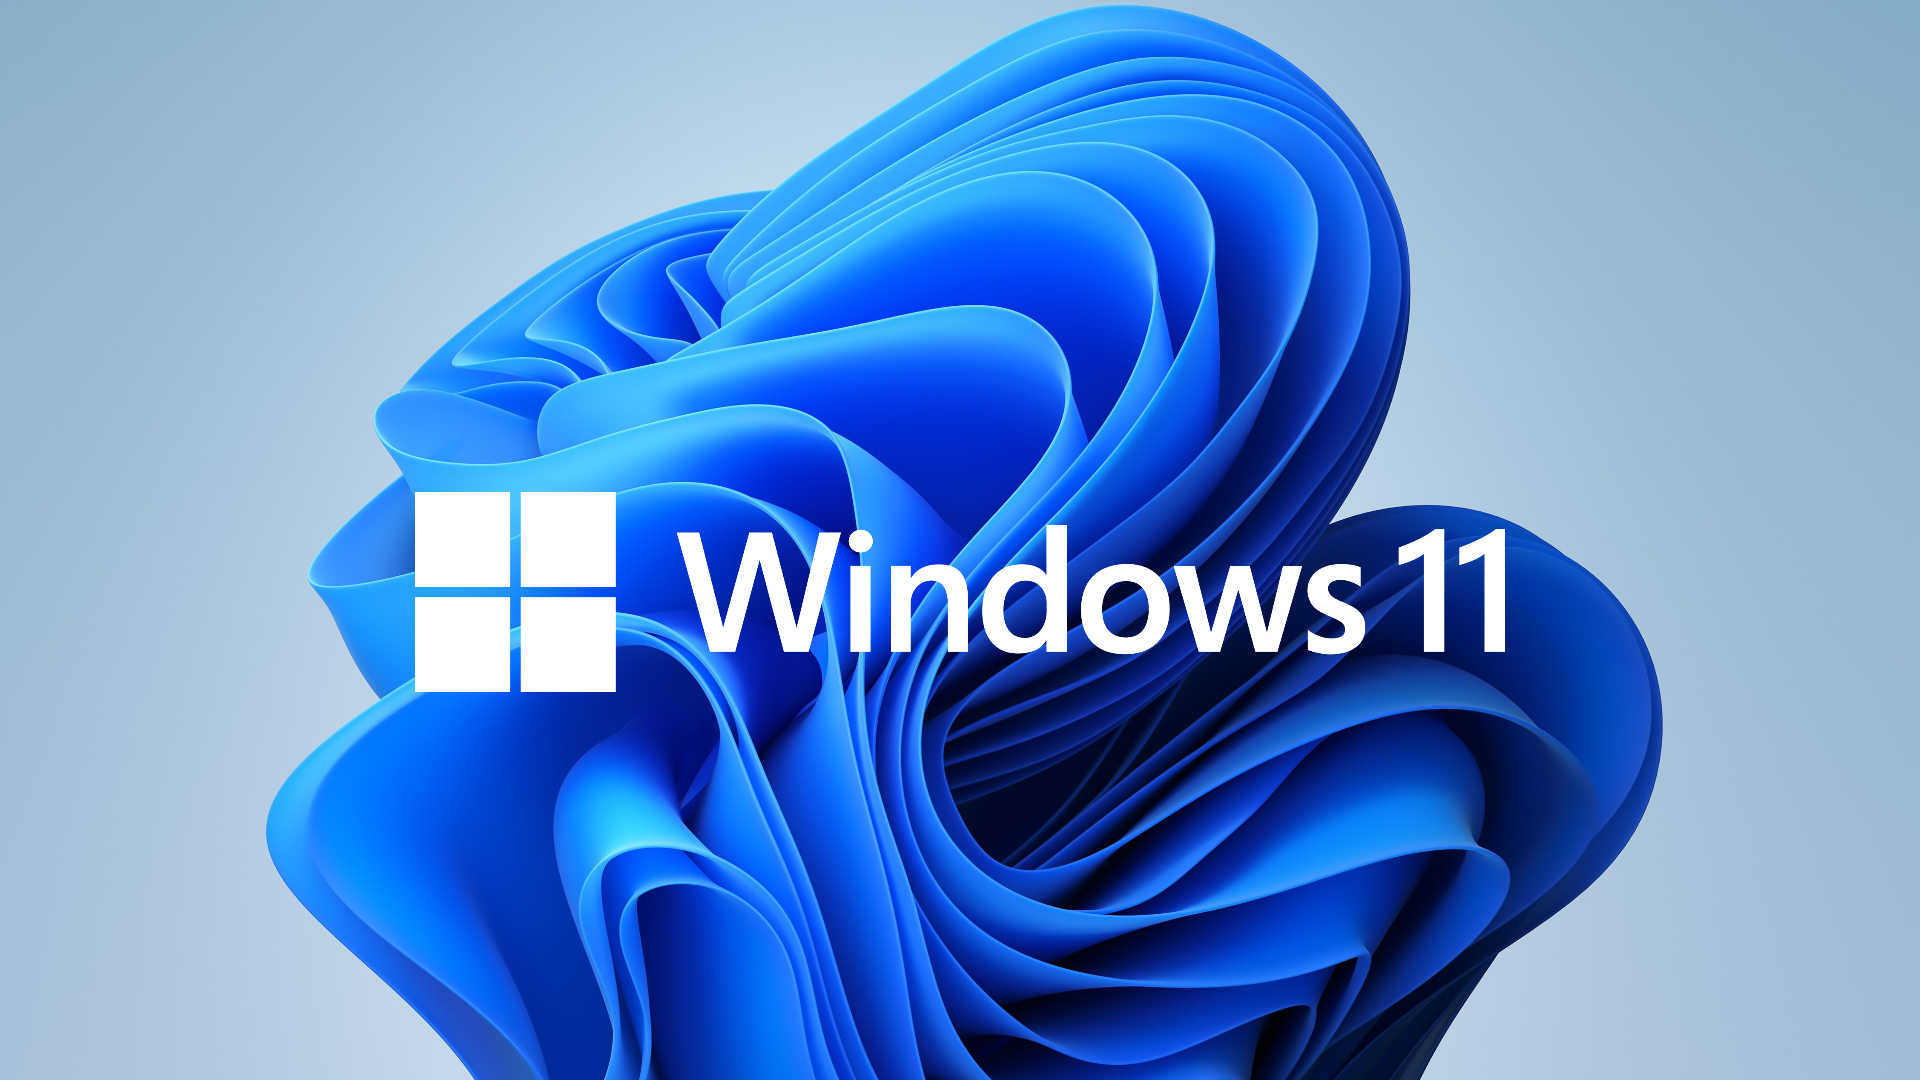 Windows 11 – Pros and Cons